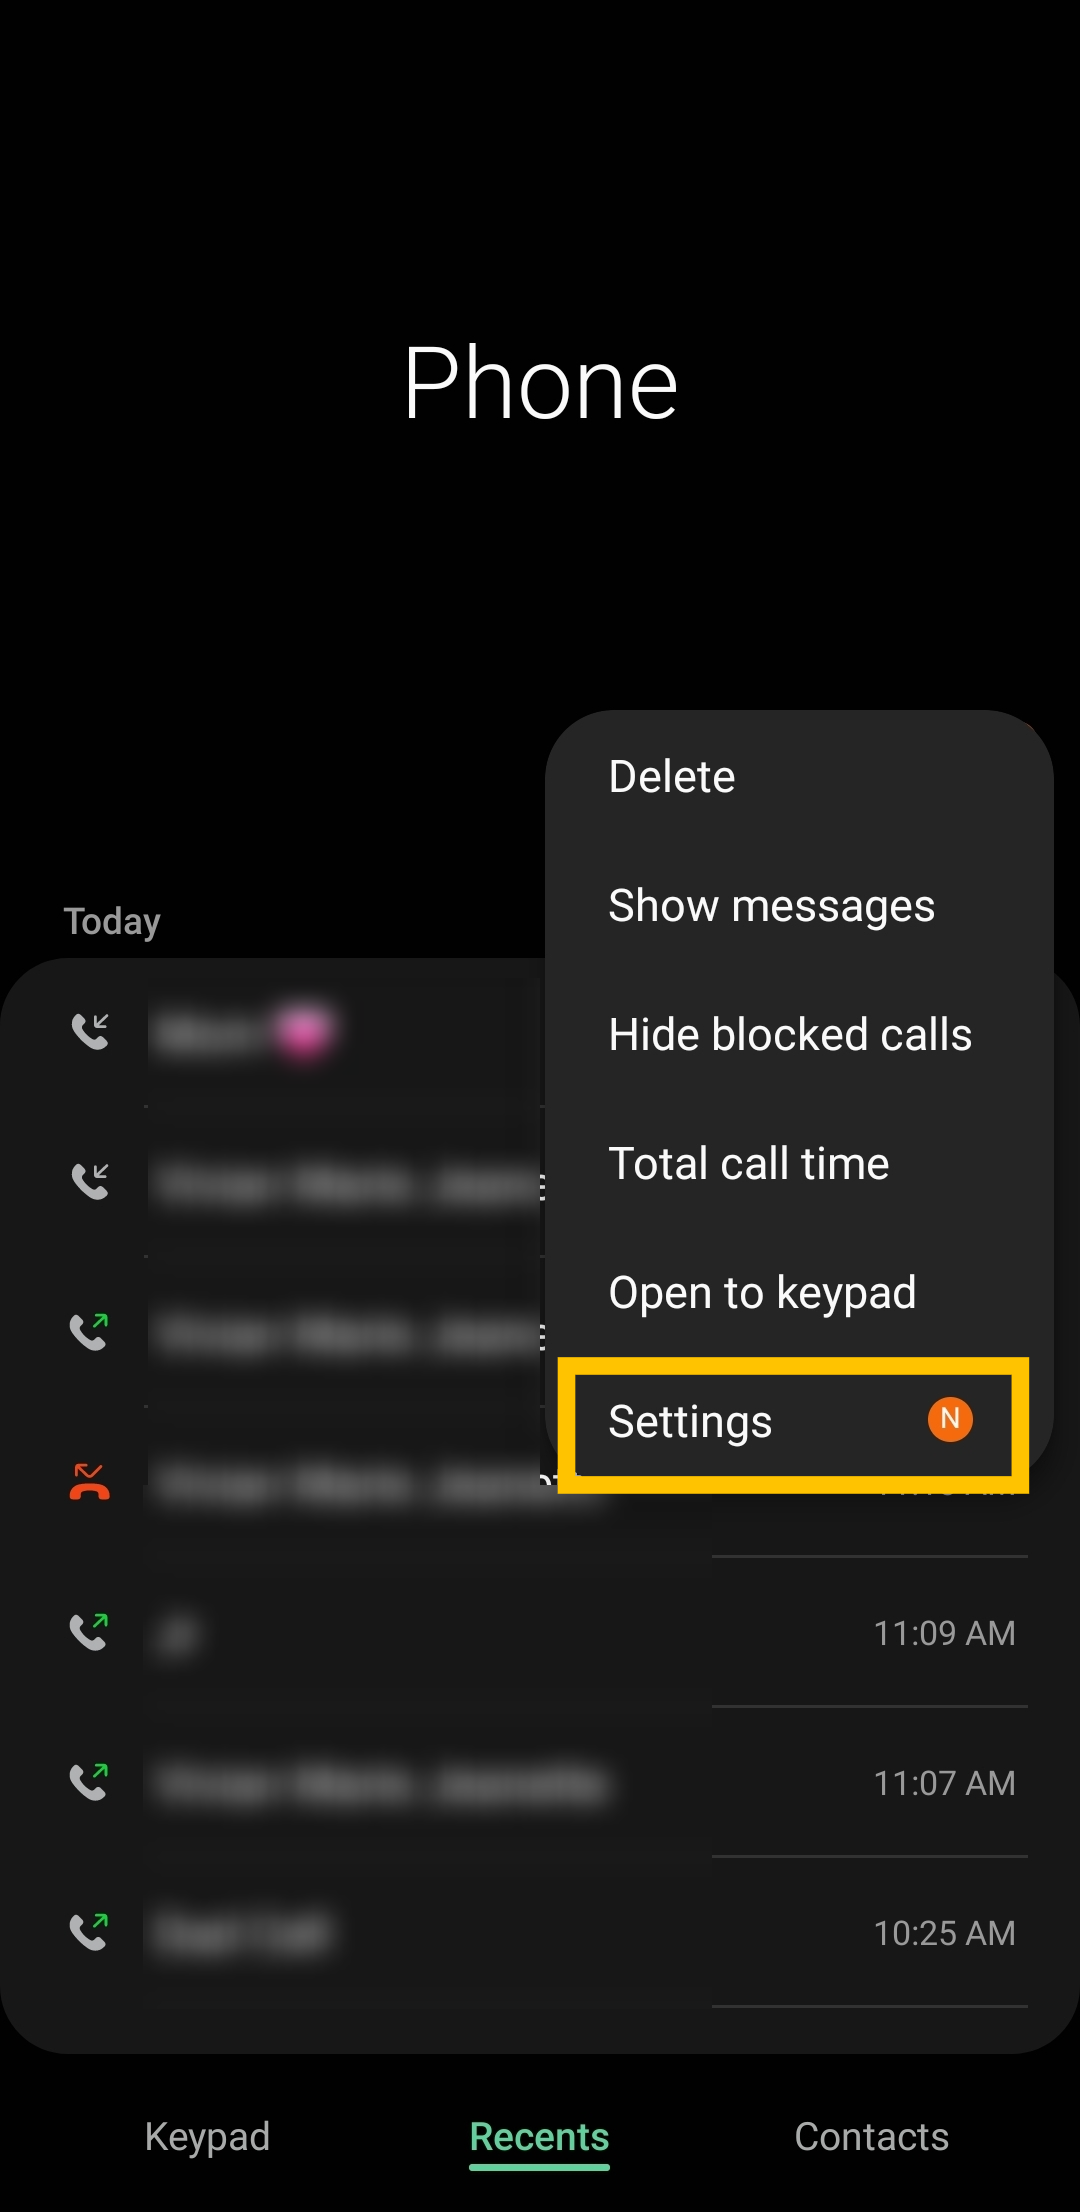 How To Call Someone Who Blocked Your Number On iPhone | Macworld